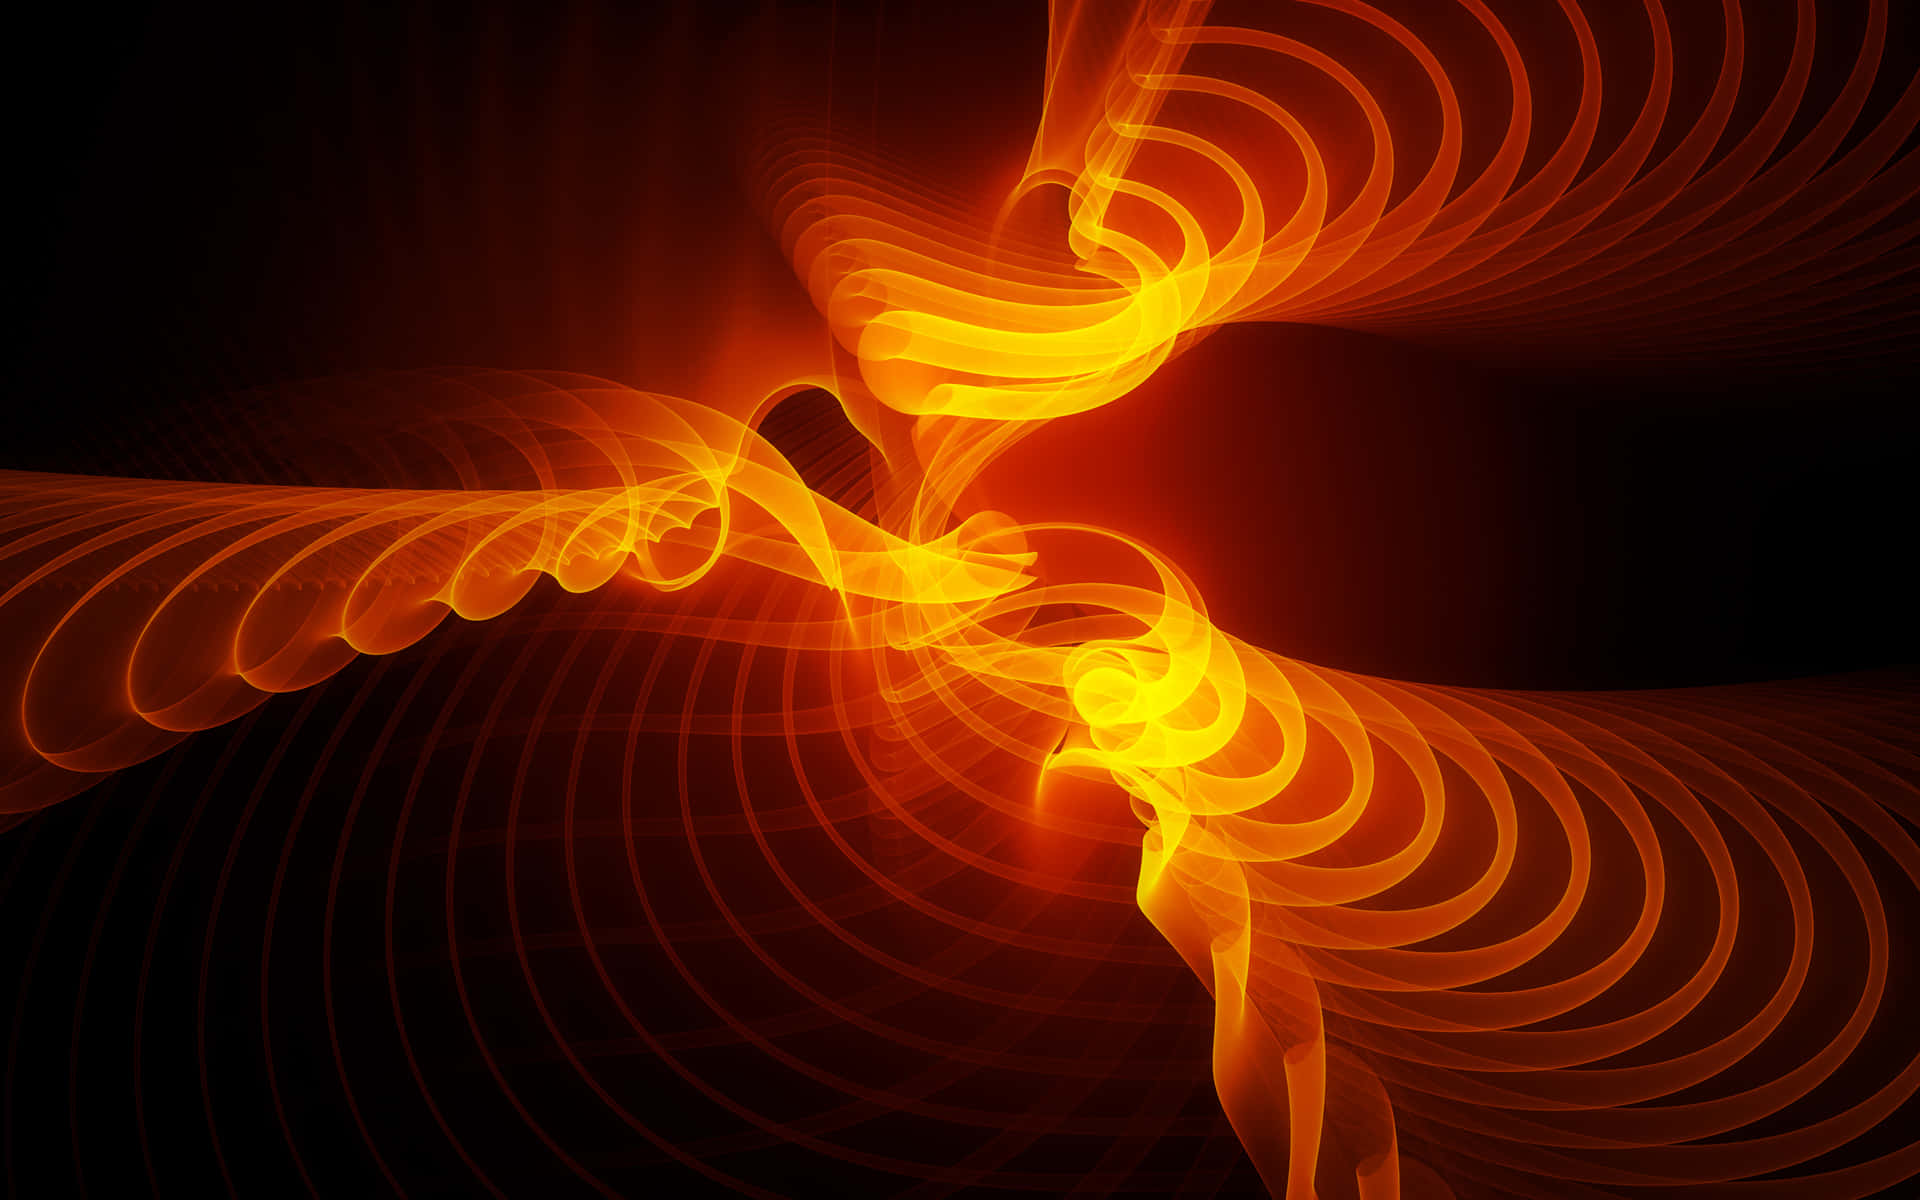 Abstract Abstract Background With Orange And Yellow Swirls